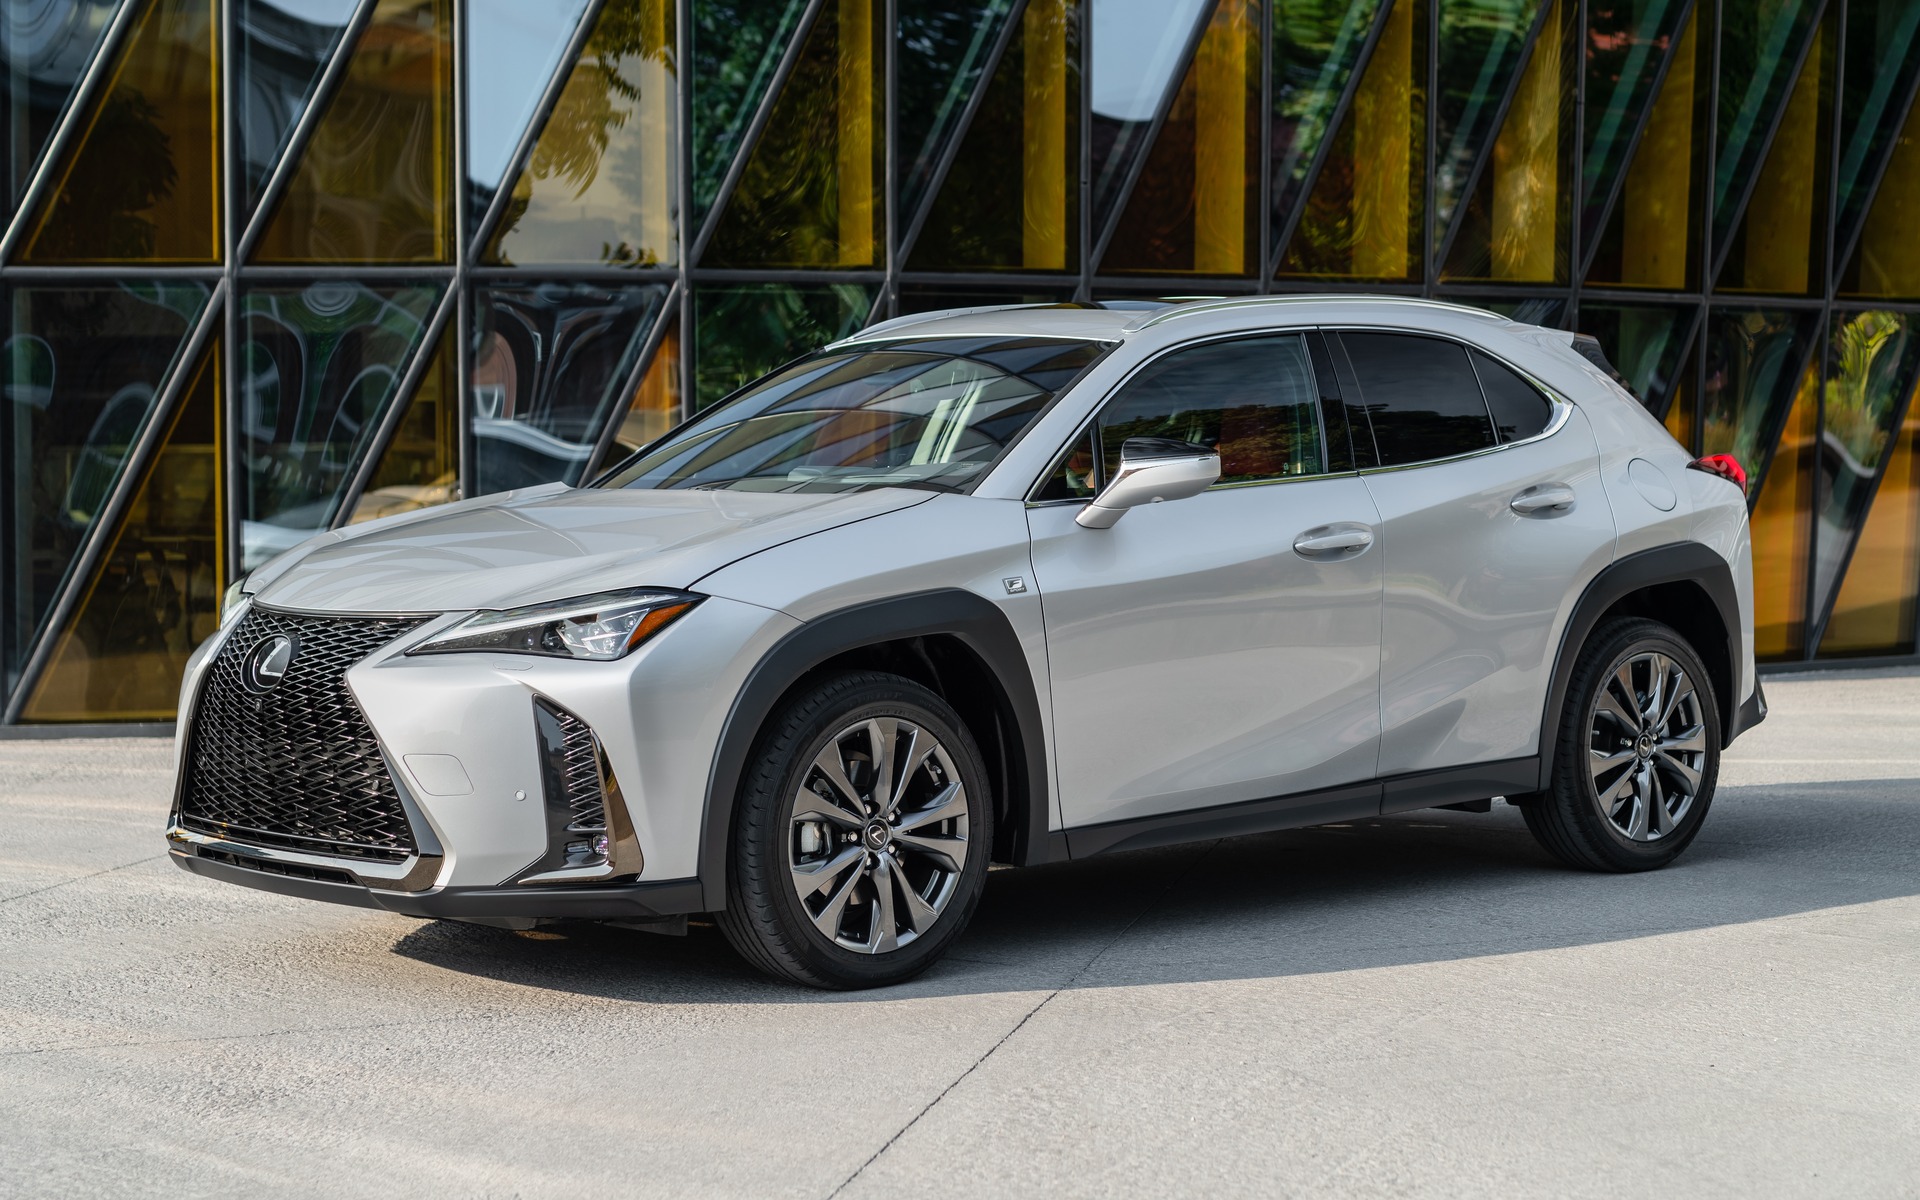 2019 Lexus Ux Ux 250h Specifications The Car Guide